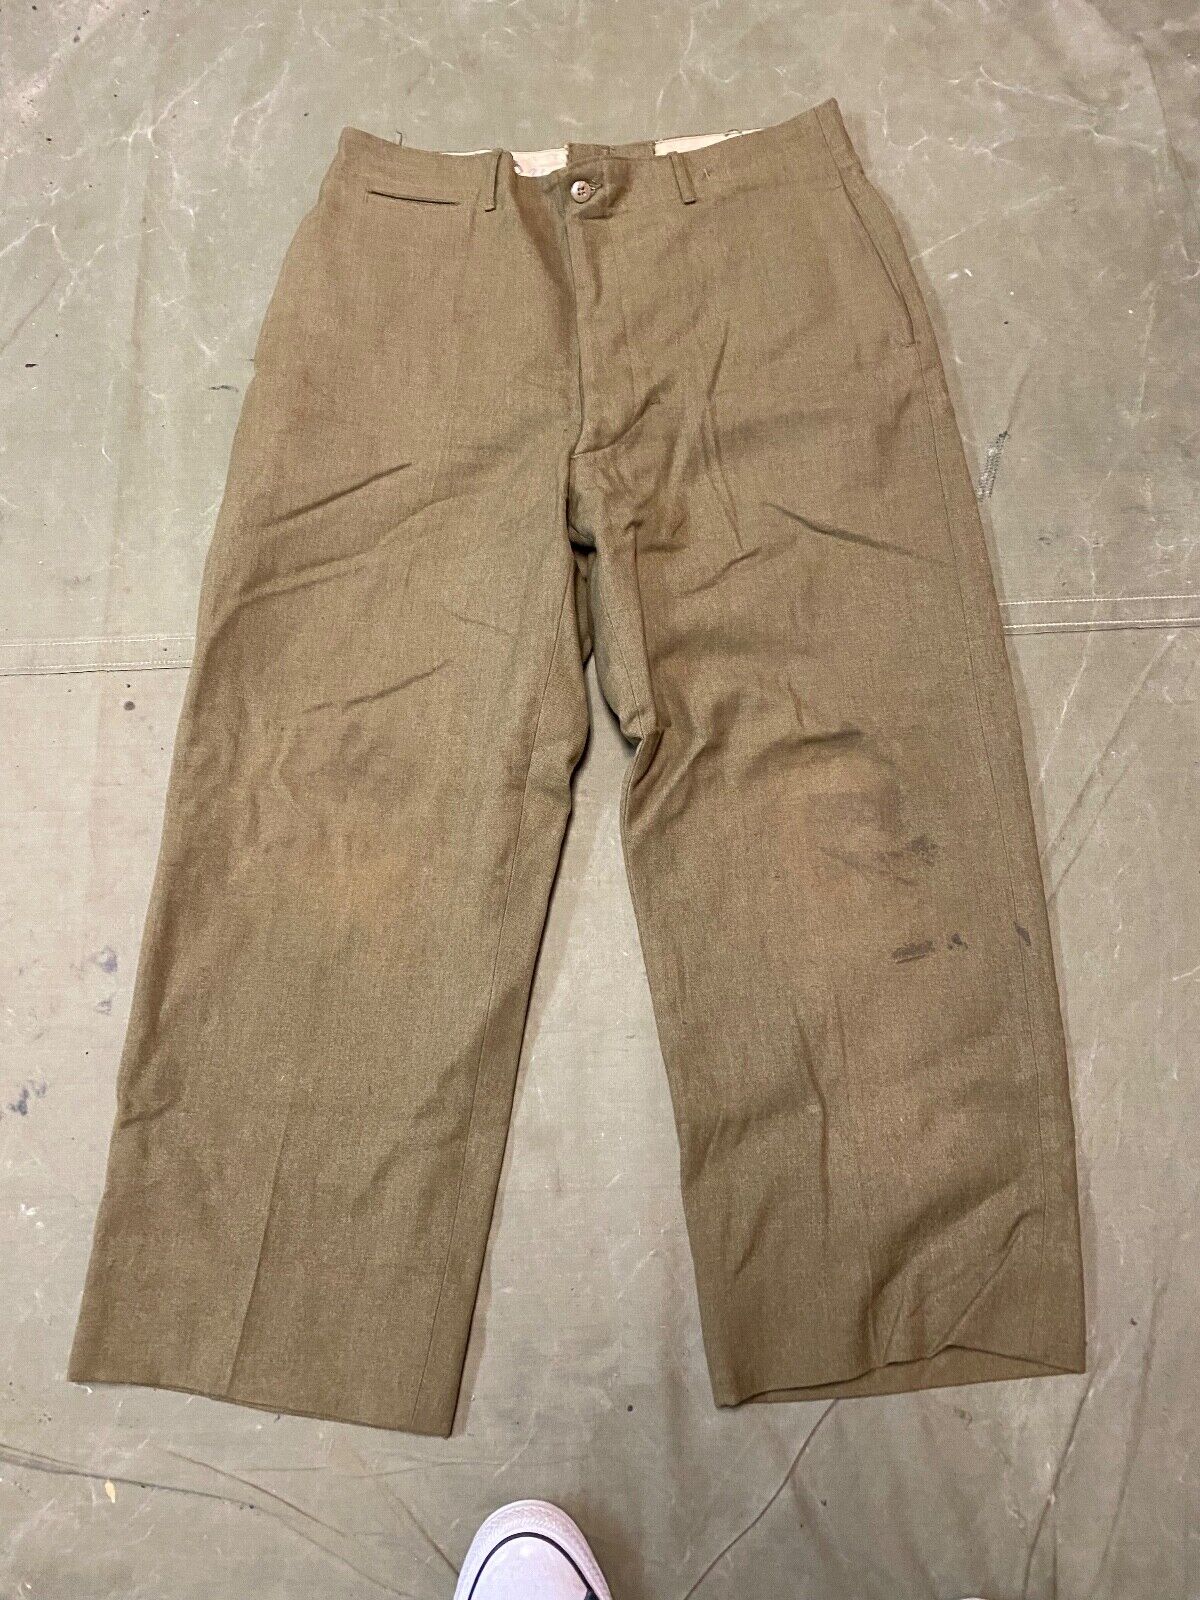 ORIGINAL WWII US ARMY M1938 WOOL COMBAT FIELD TROUSERS- LARGE 36 WAIST